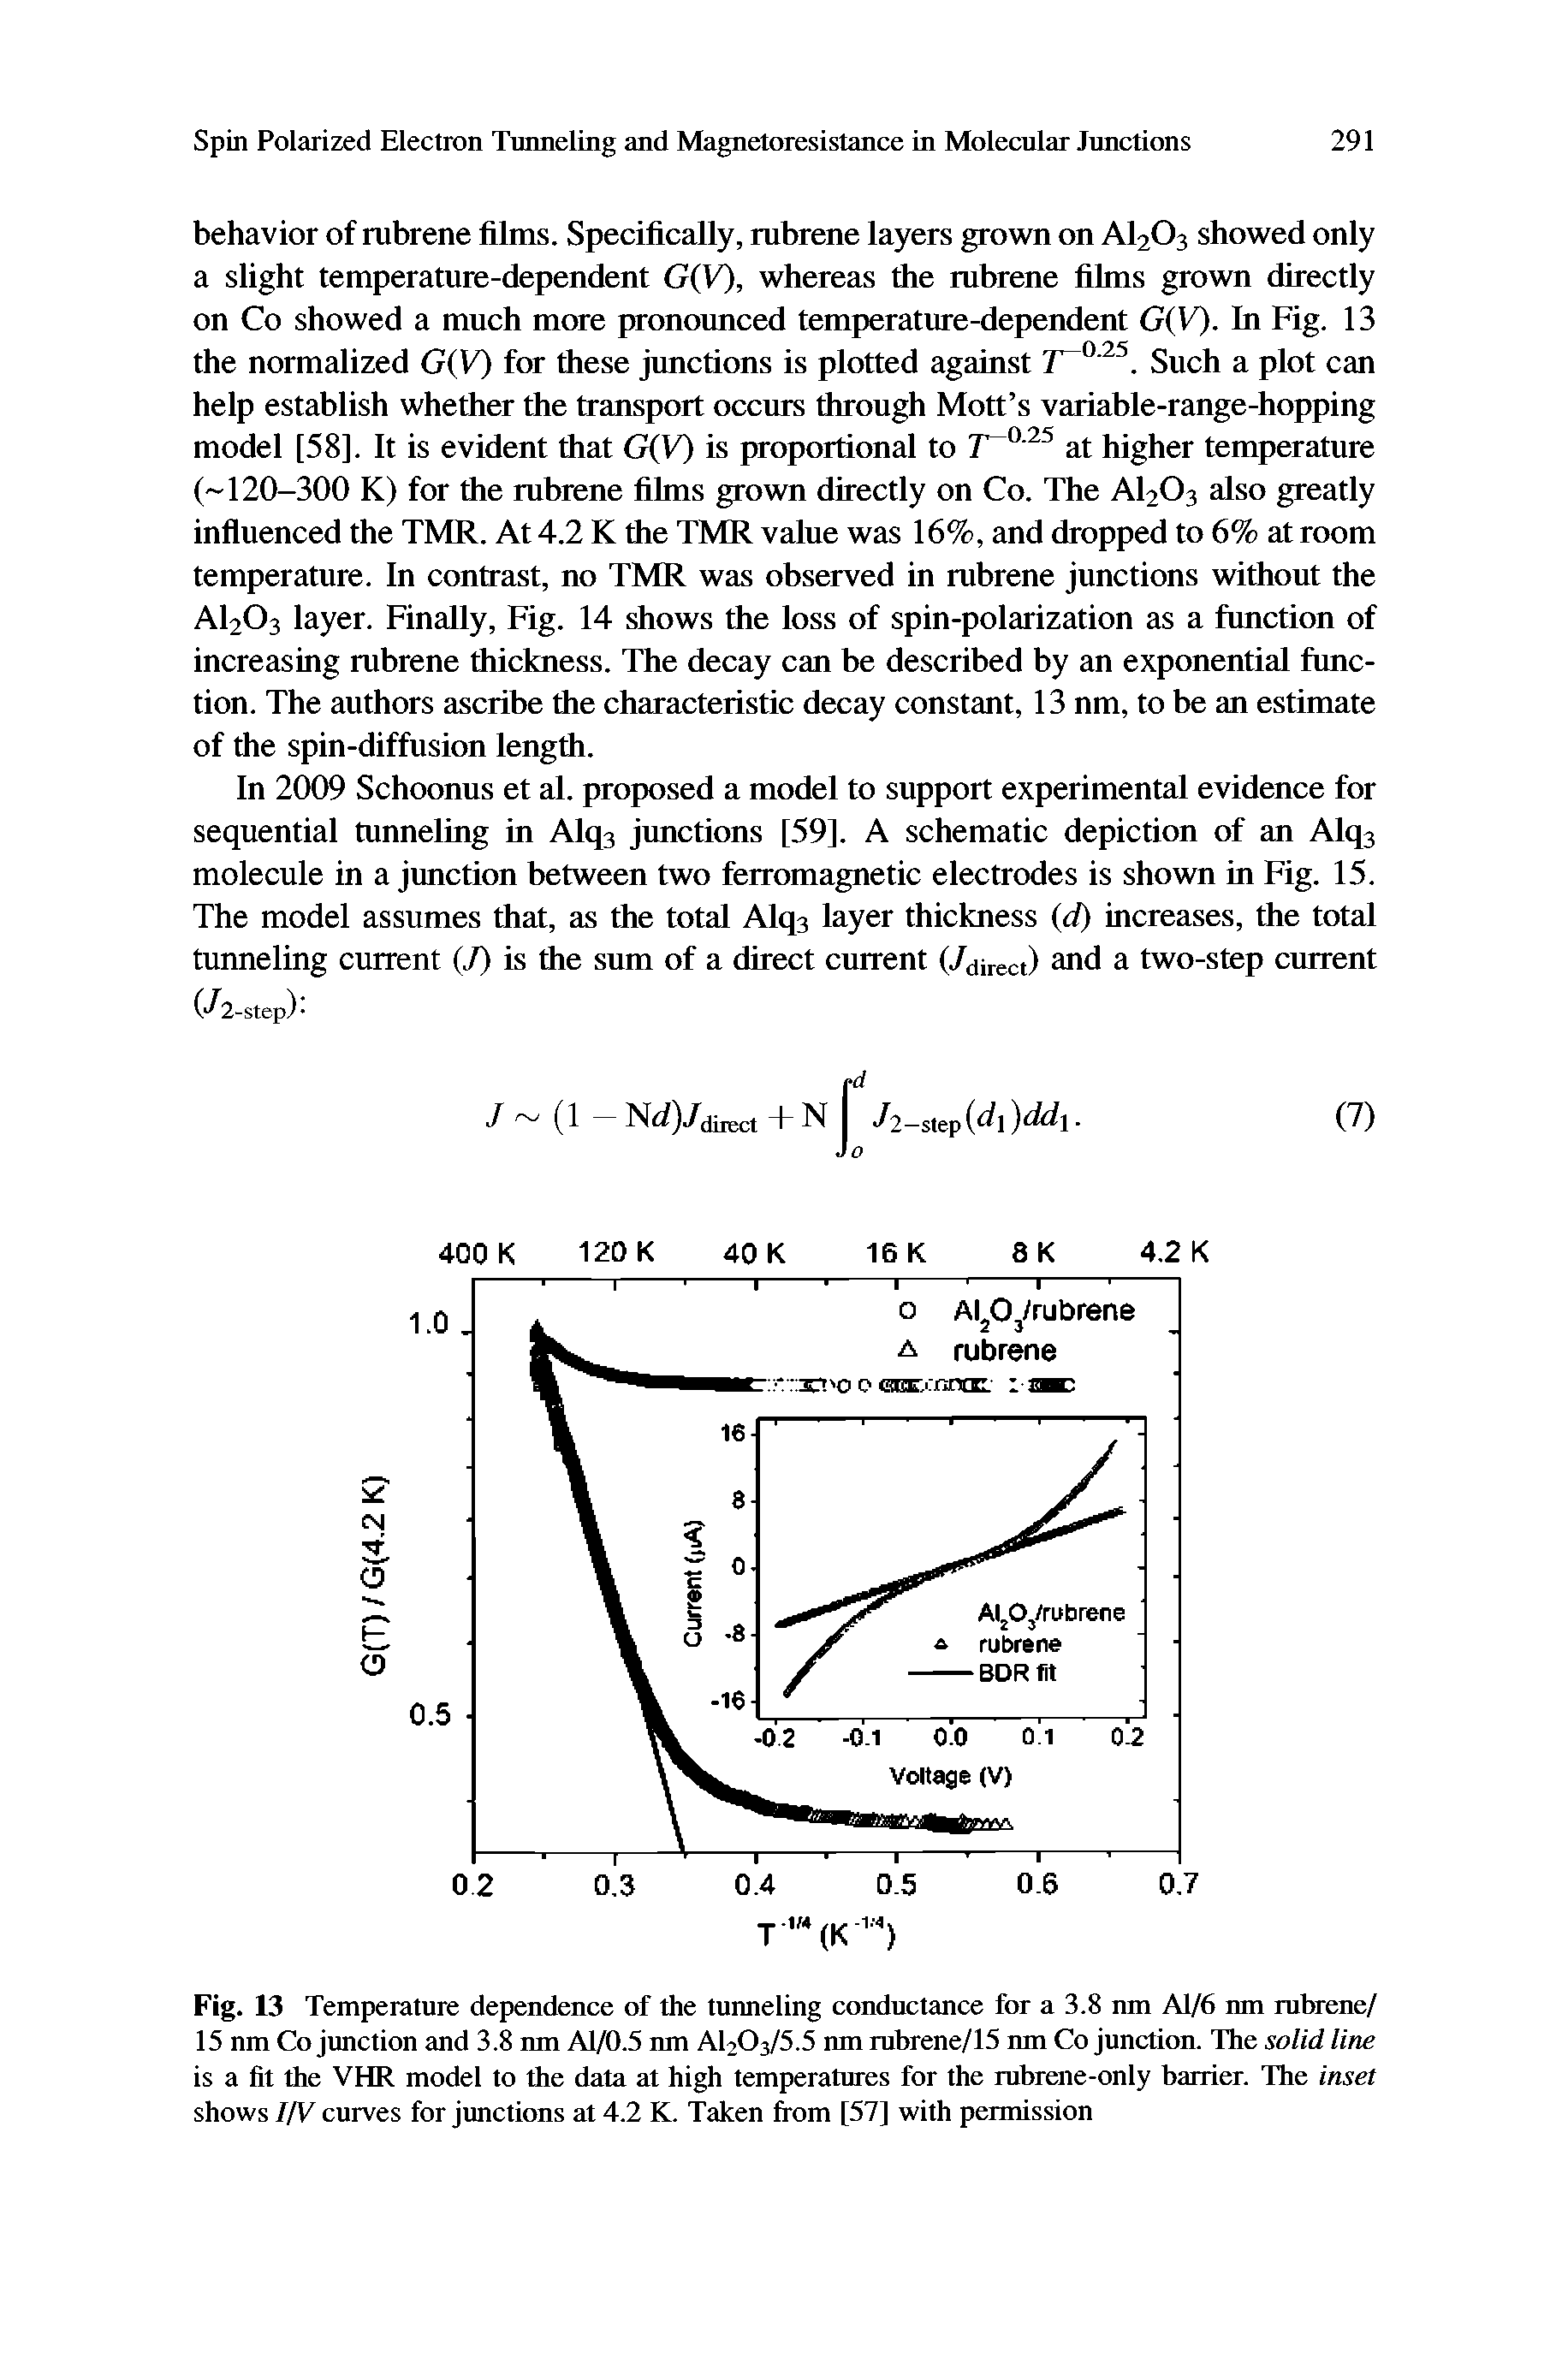 Fig. 13 Temperature dependence of the tunneling conductance for a 3.8 nm Al/6 nm mbrene/ 15 nm Co junction and 3.8 nm Al/0.5 nm AI2O3/5.5 nm mbrene/15 nm Co Junction. Ths solid line is a fit the VHR model to the data at high temperatures for the mbrene-only barrier. The inset shows I V curves for Junctions at 4.2 K. Taken from [57] with permission...